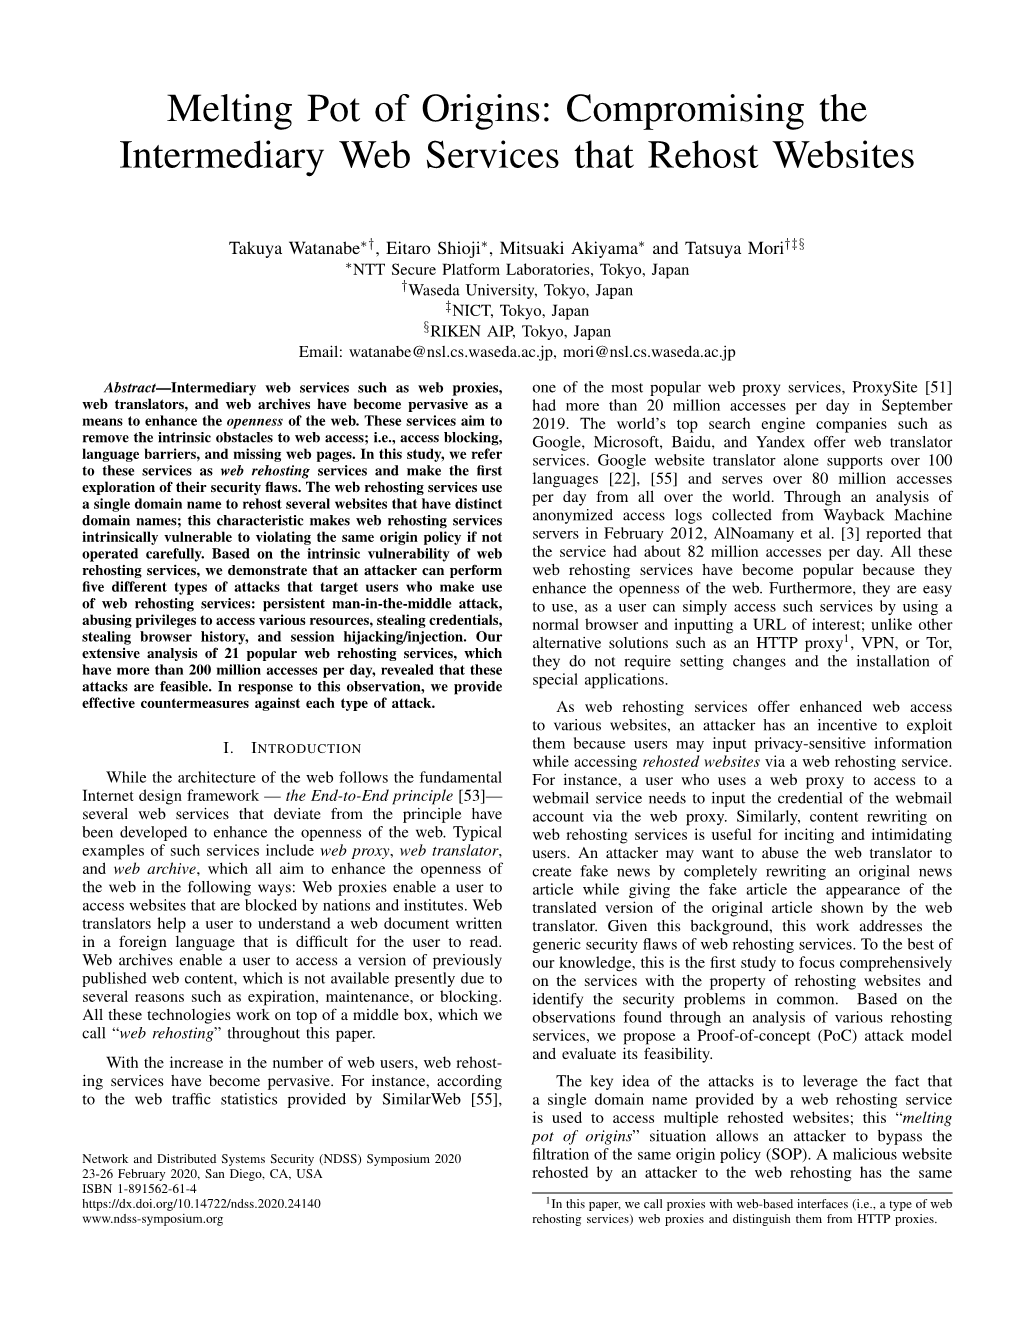 Melting Pot of Origins: Compromising the Intermediary Web Services That Rehost Websites